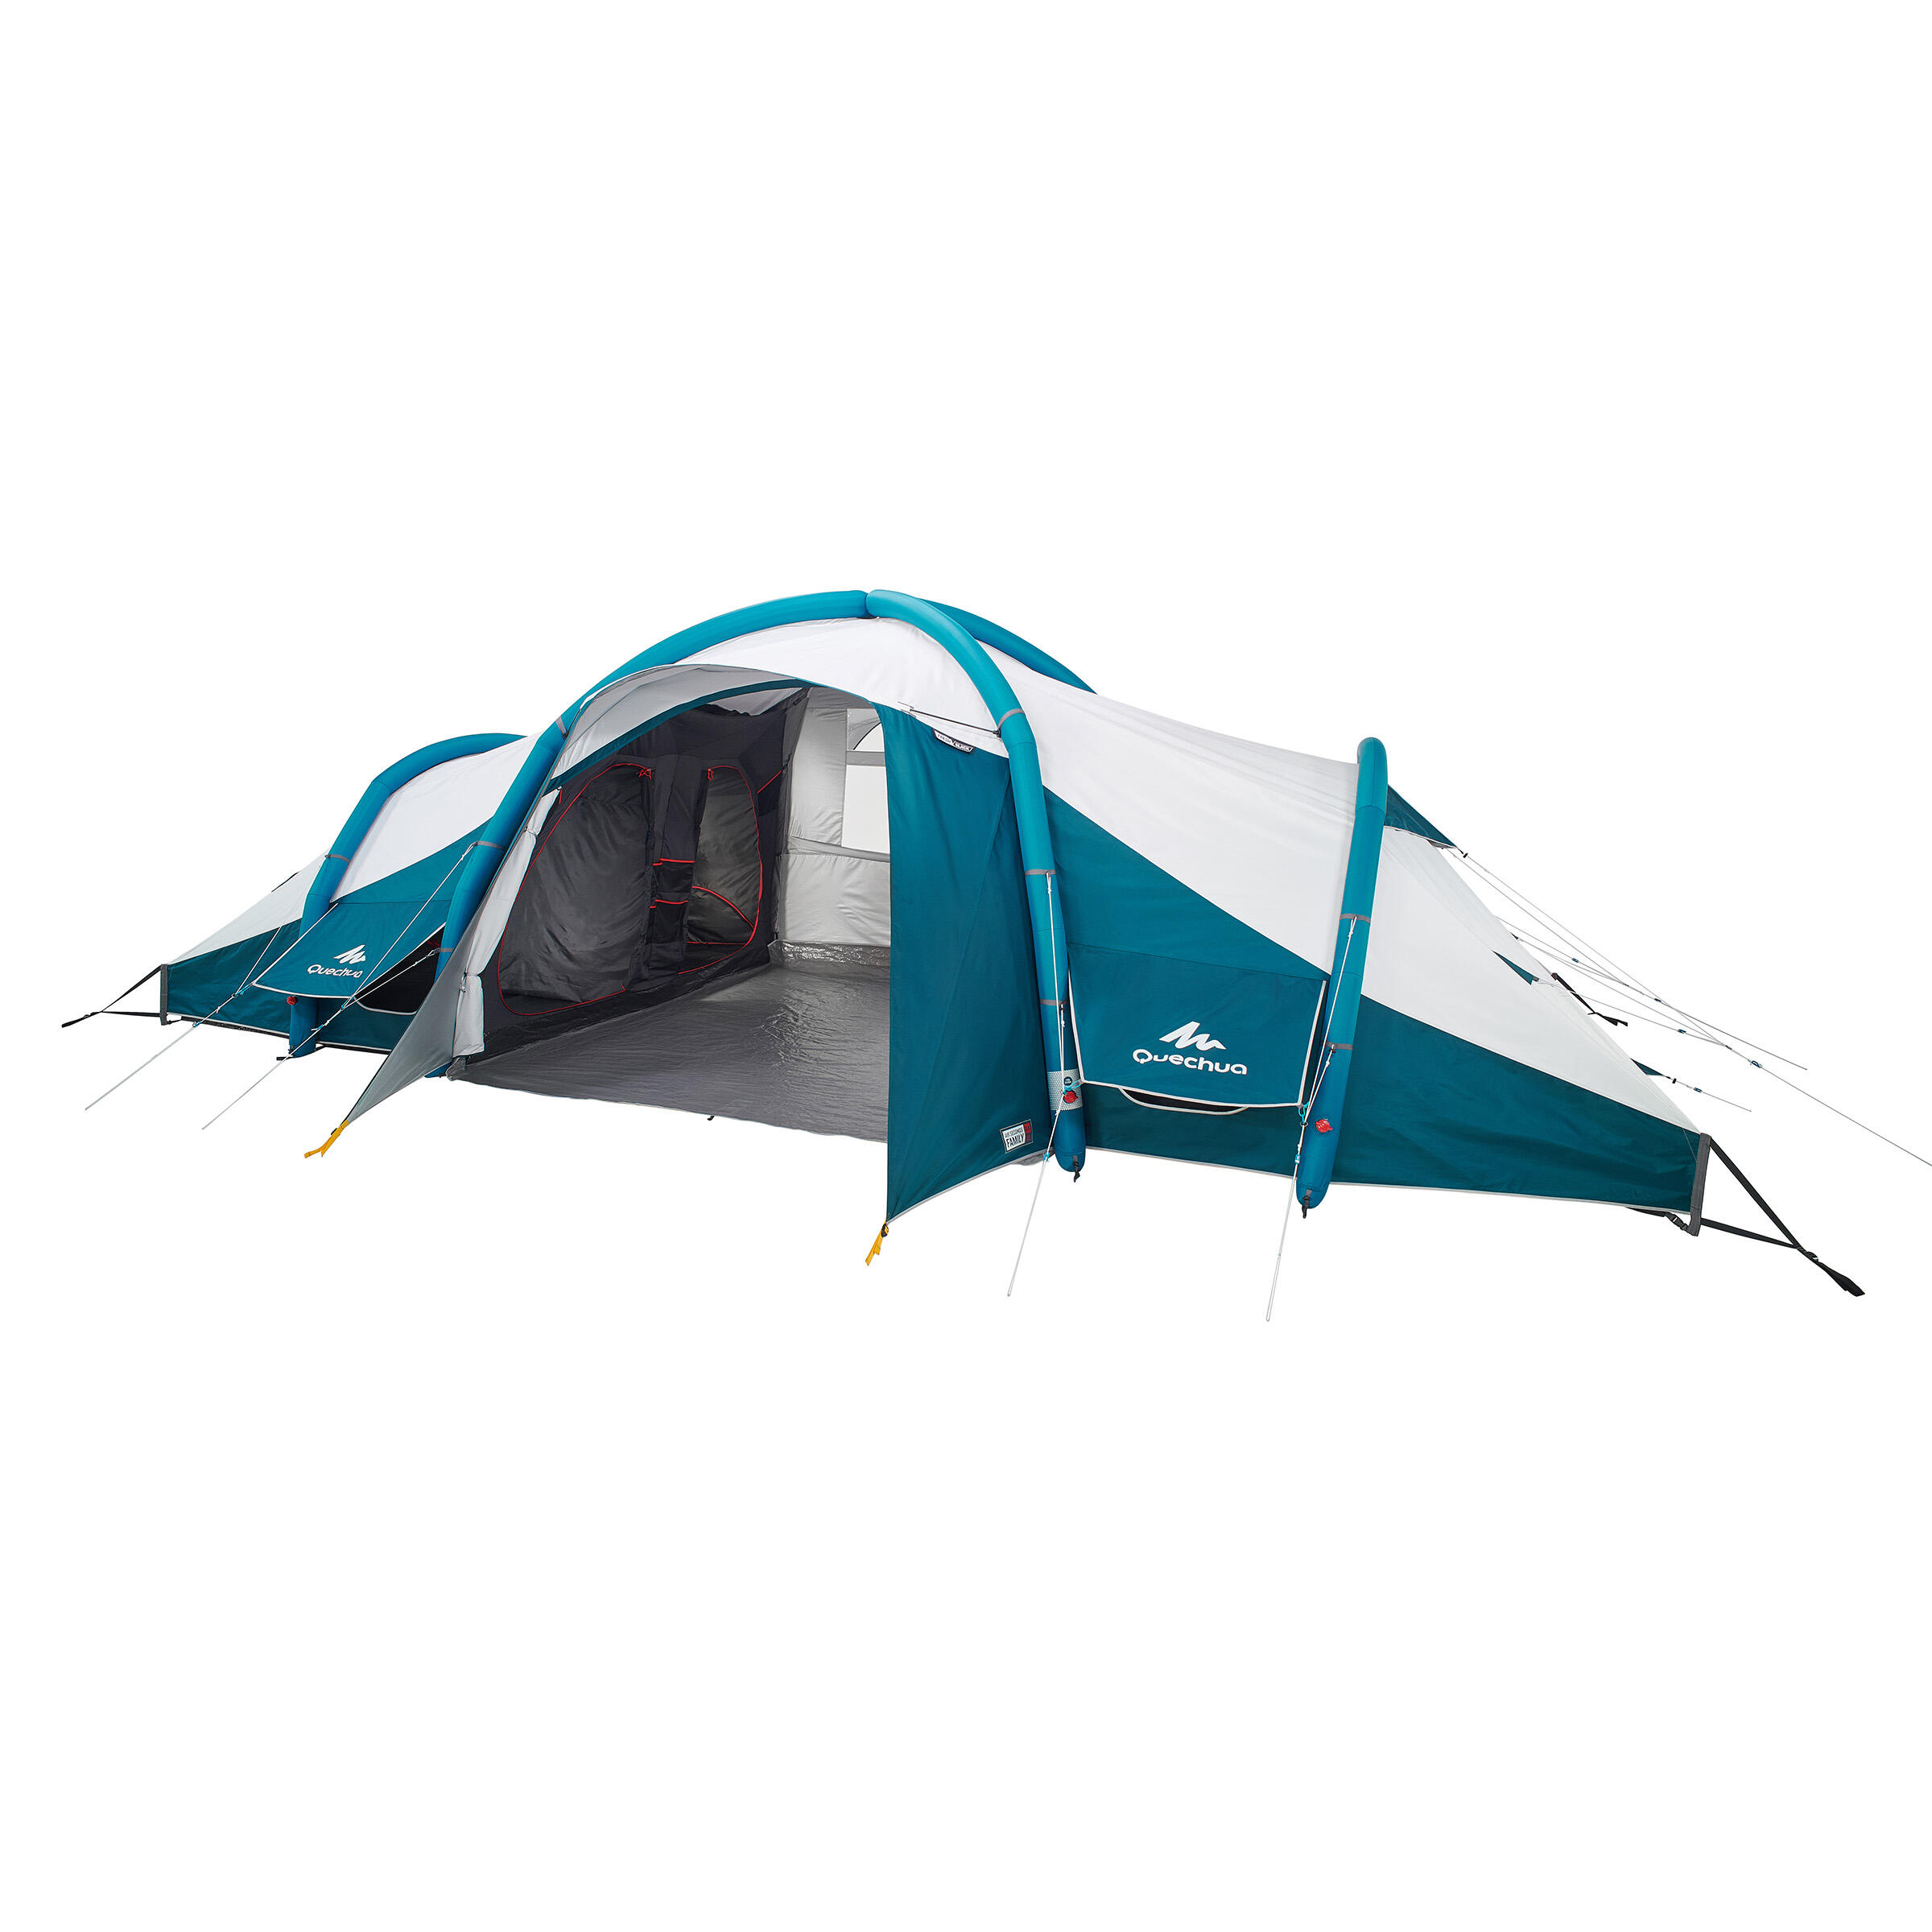 Inflatable camping tent - Air Seconds 8 